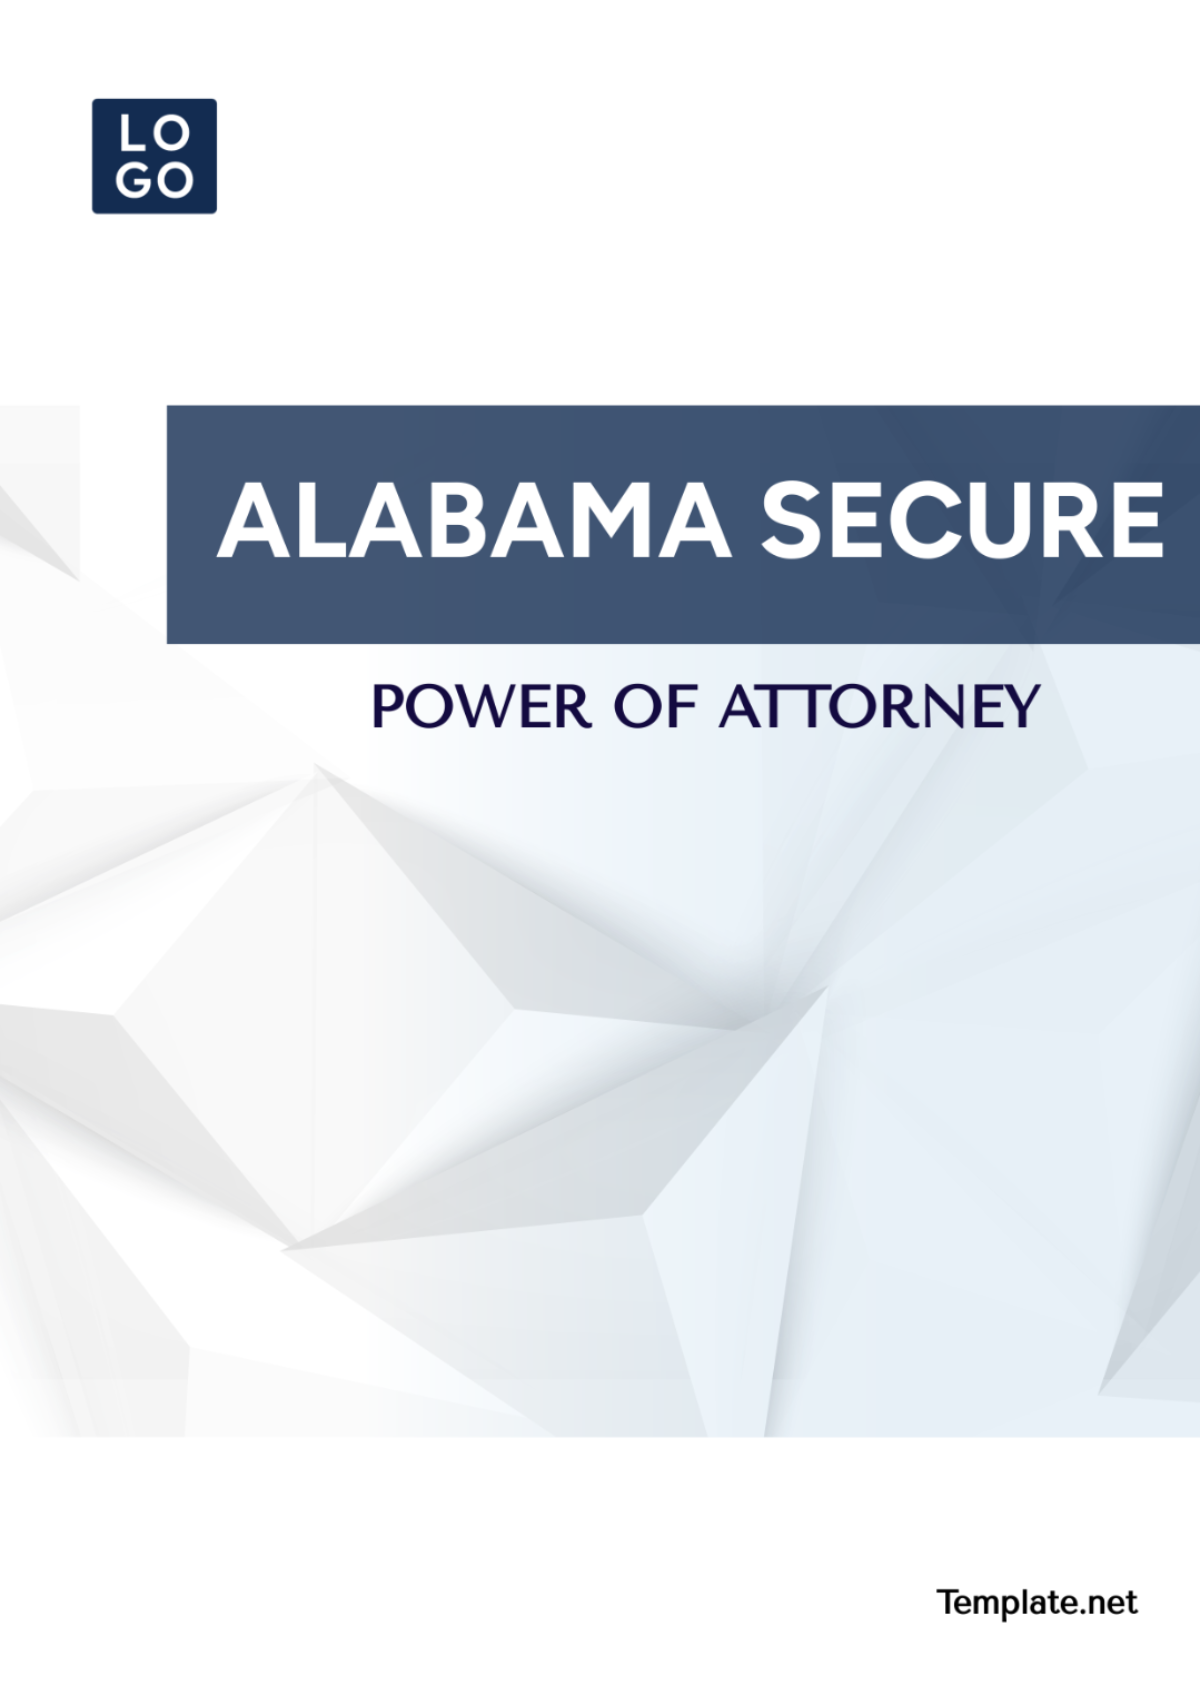 Free Alabama Secure Power of Attorney Template